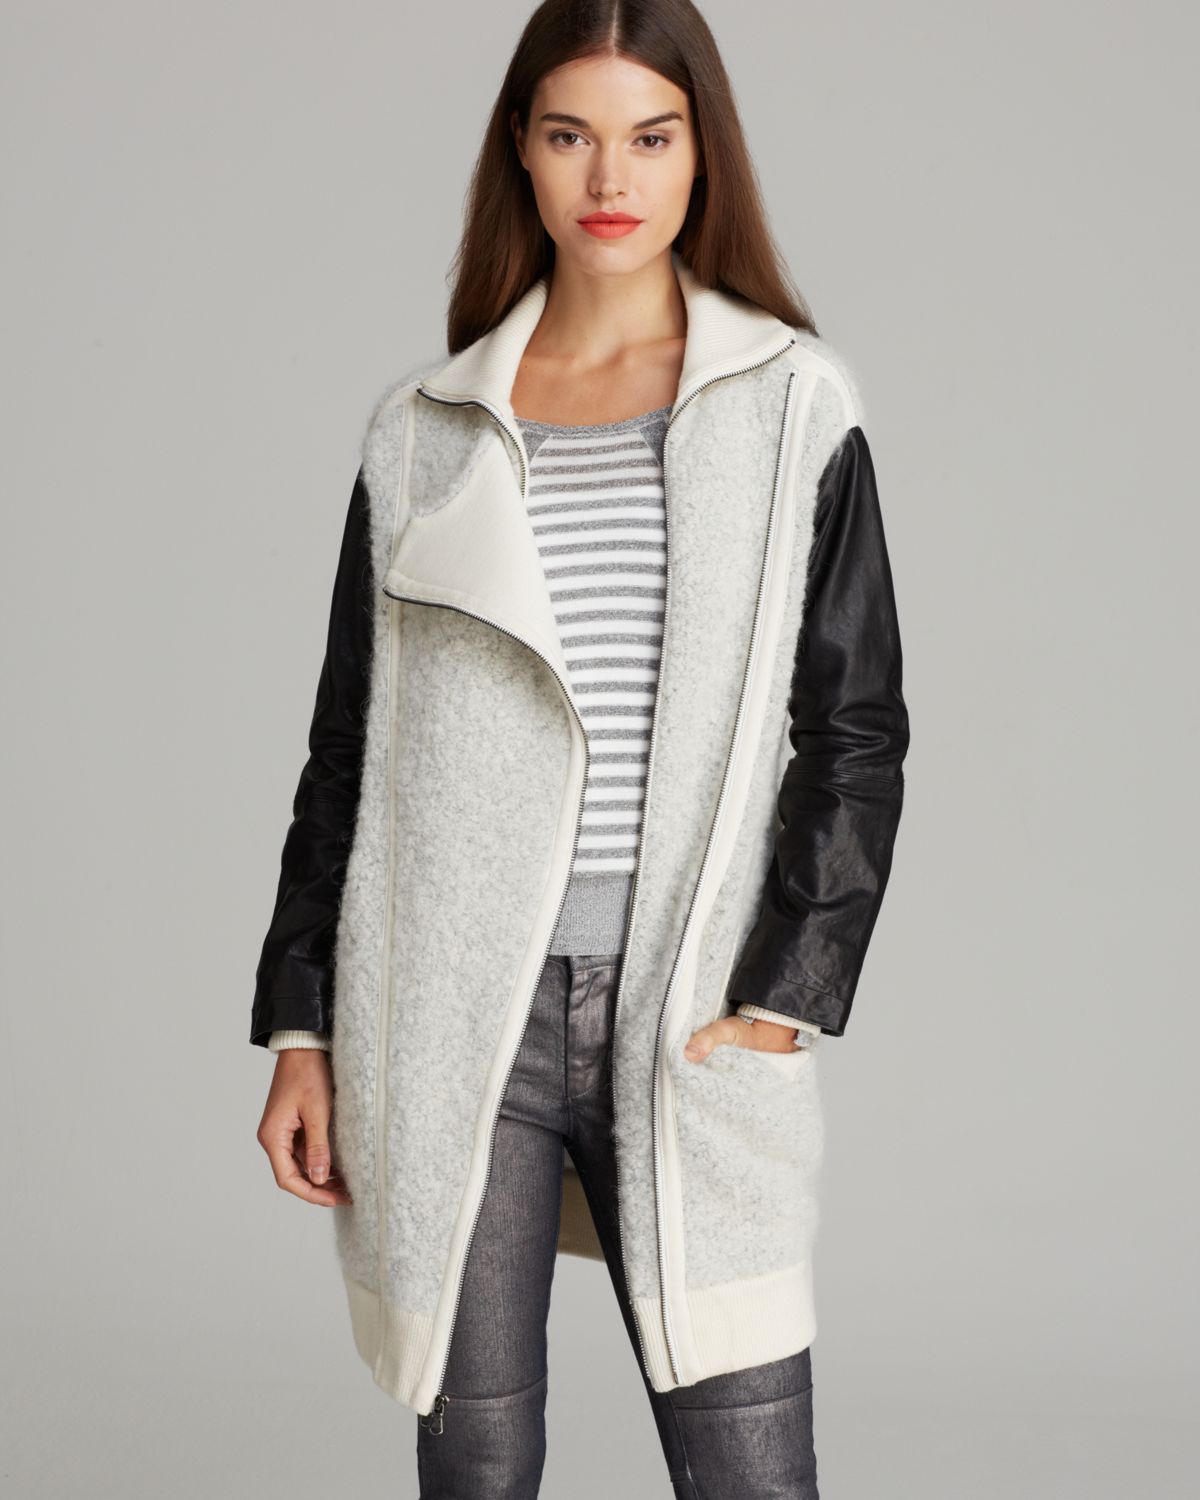 Lyst - Marc By Marc Jacobs Sweater Coat Nessi Leather Sleeve in Gray